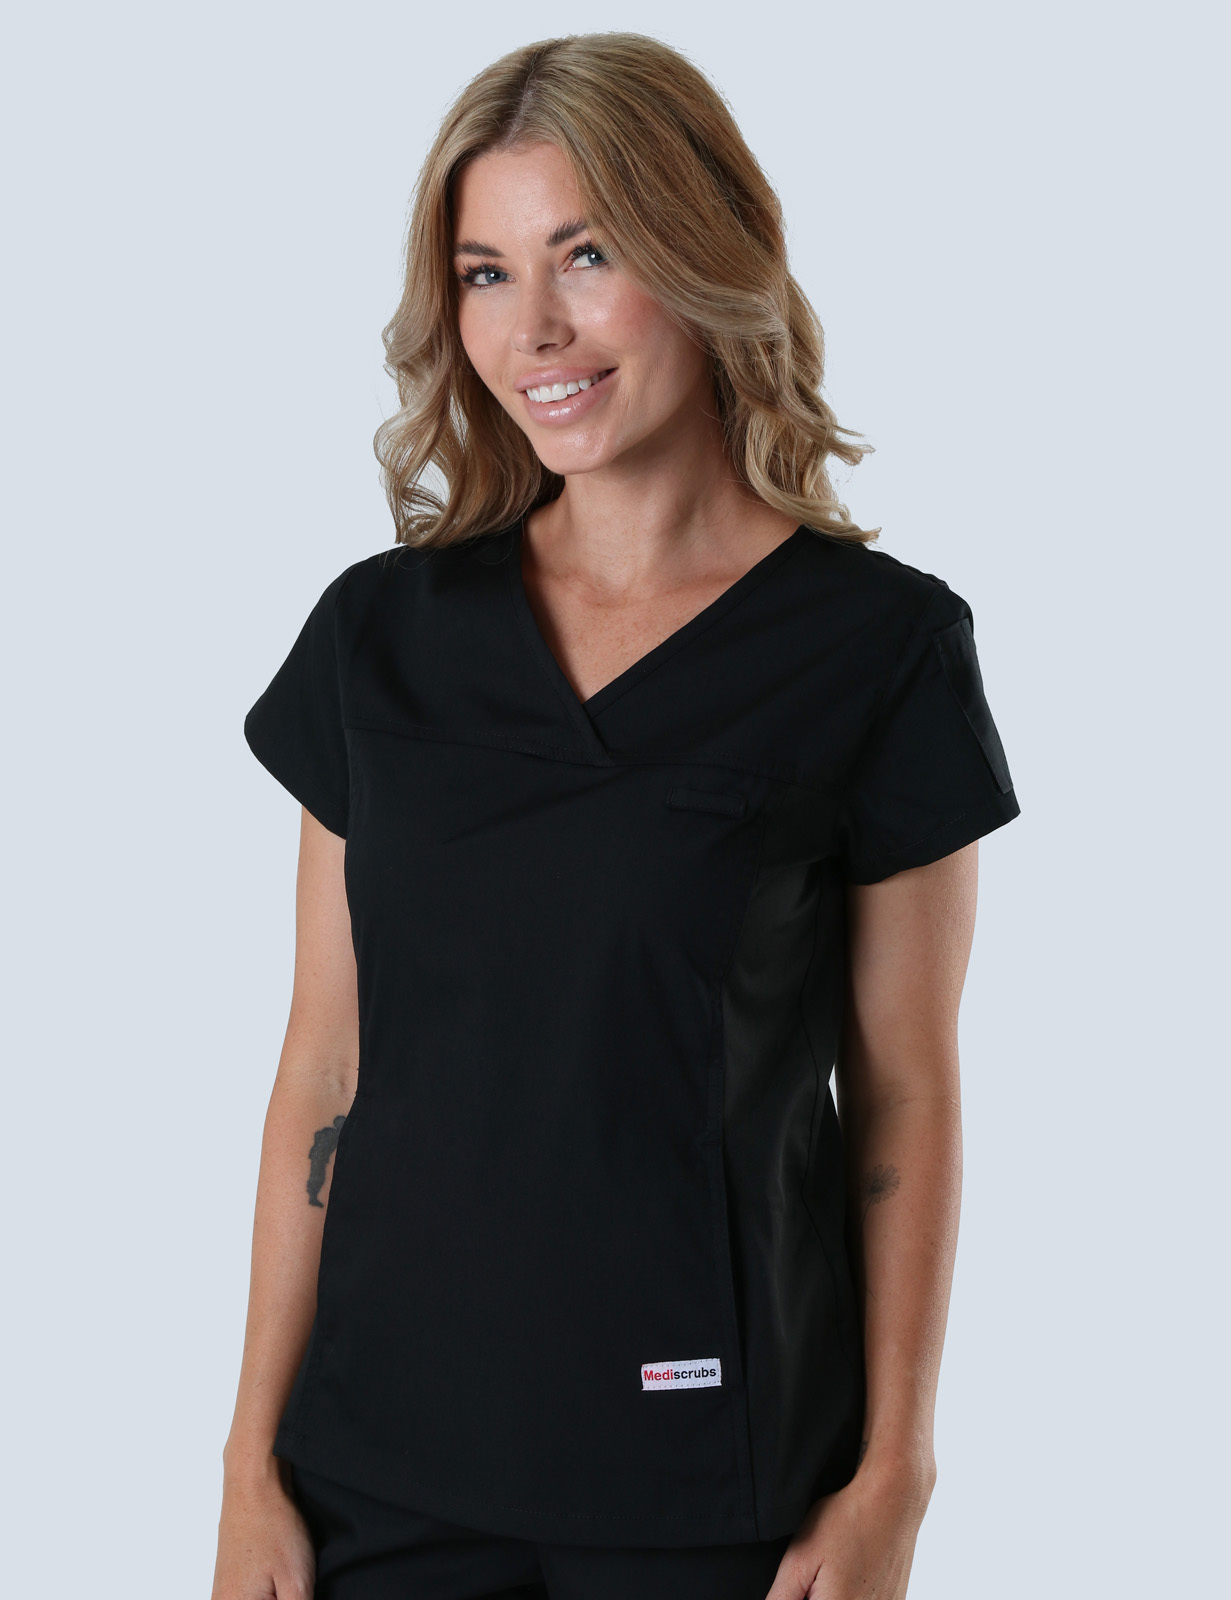 Gladstone Hospital - Paeds Unit (Women's Fit Spandex Scrub Top and Cargo Pants in Black incl Logos)